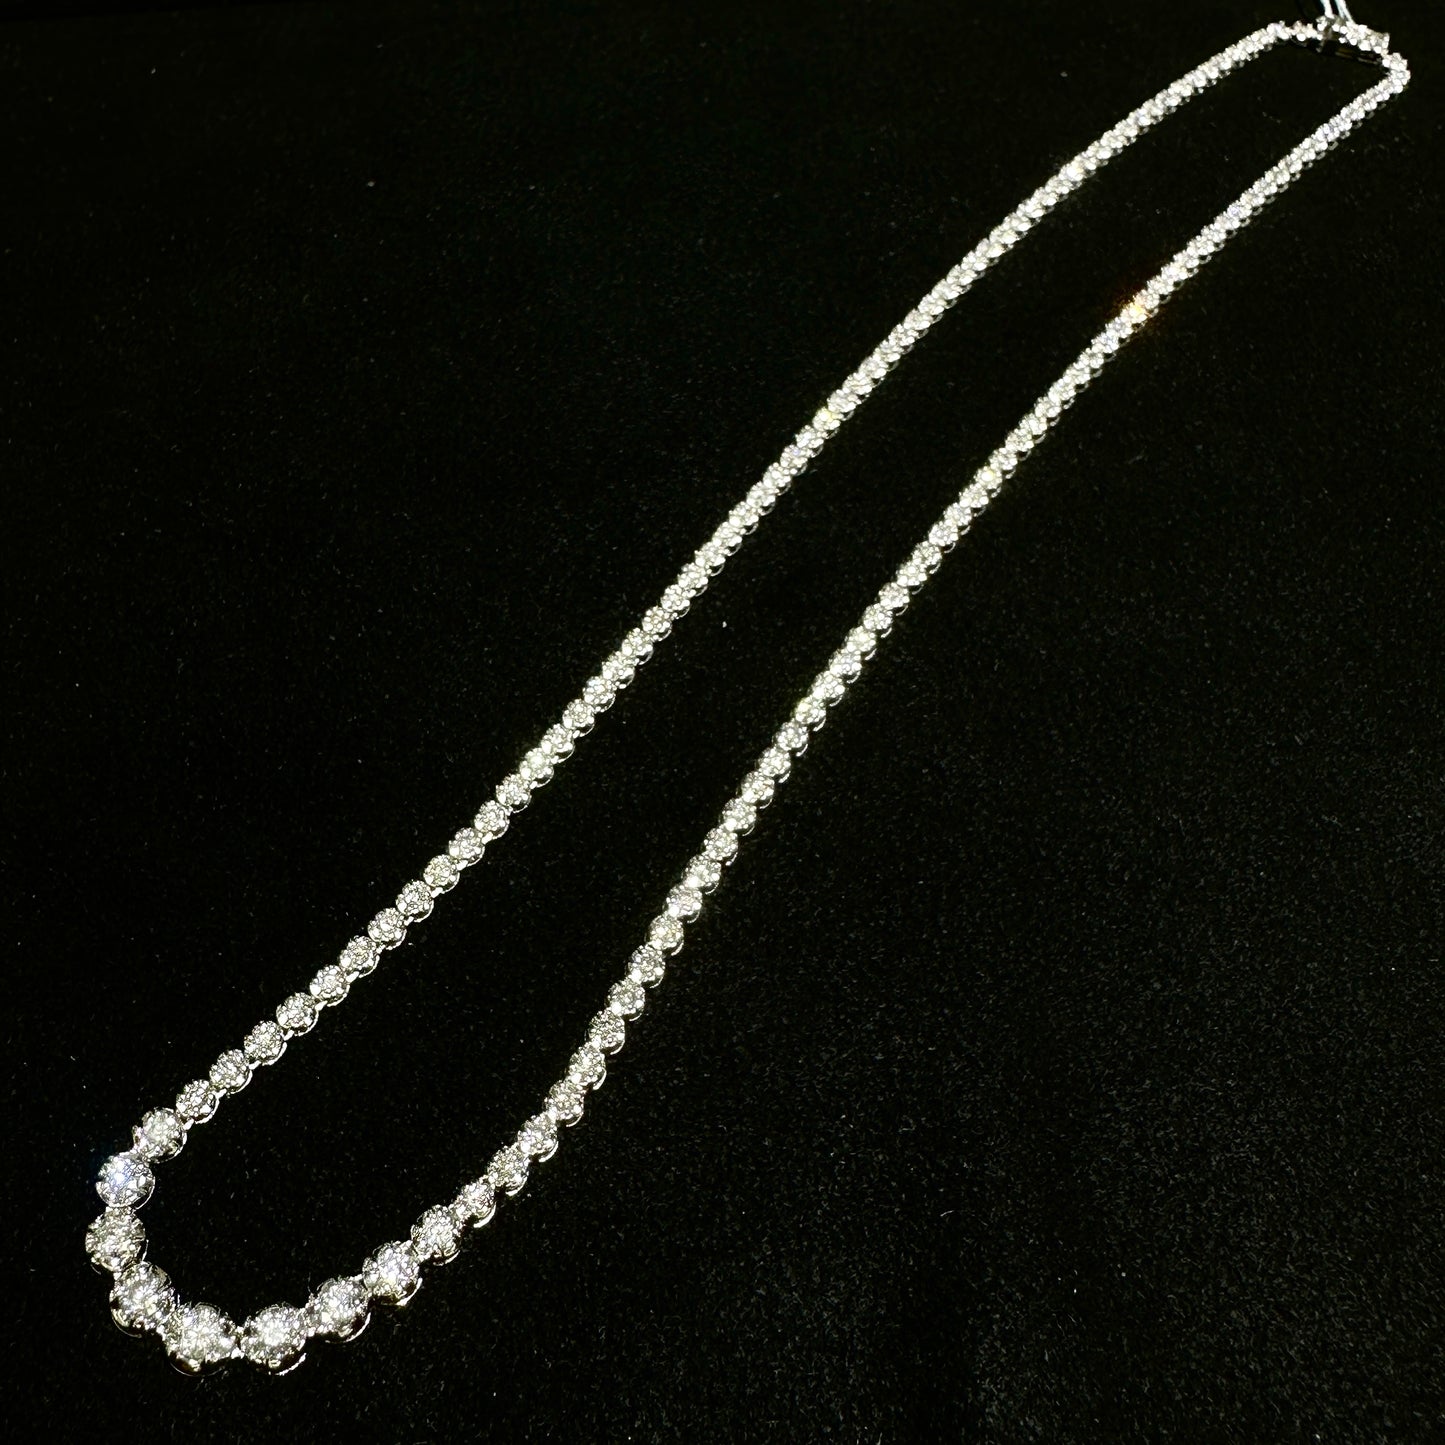 Luxurious Full Natural Diamond Necklace in 18K White Gold